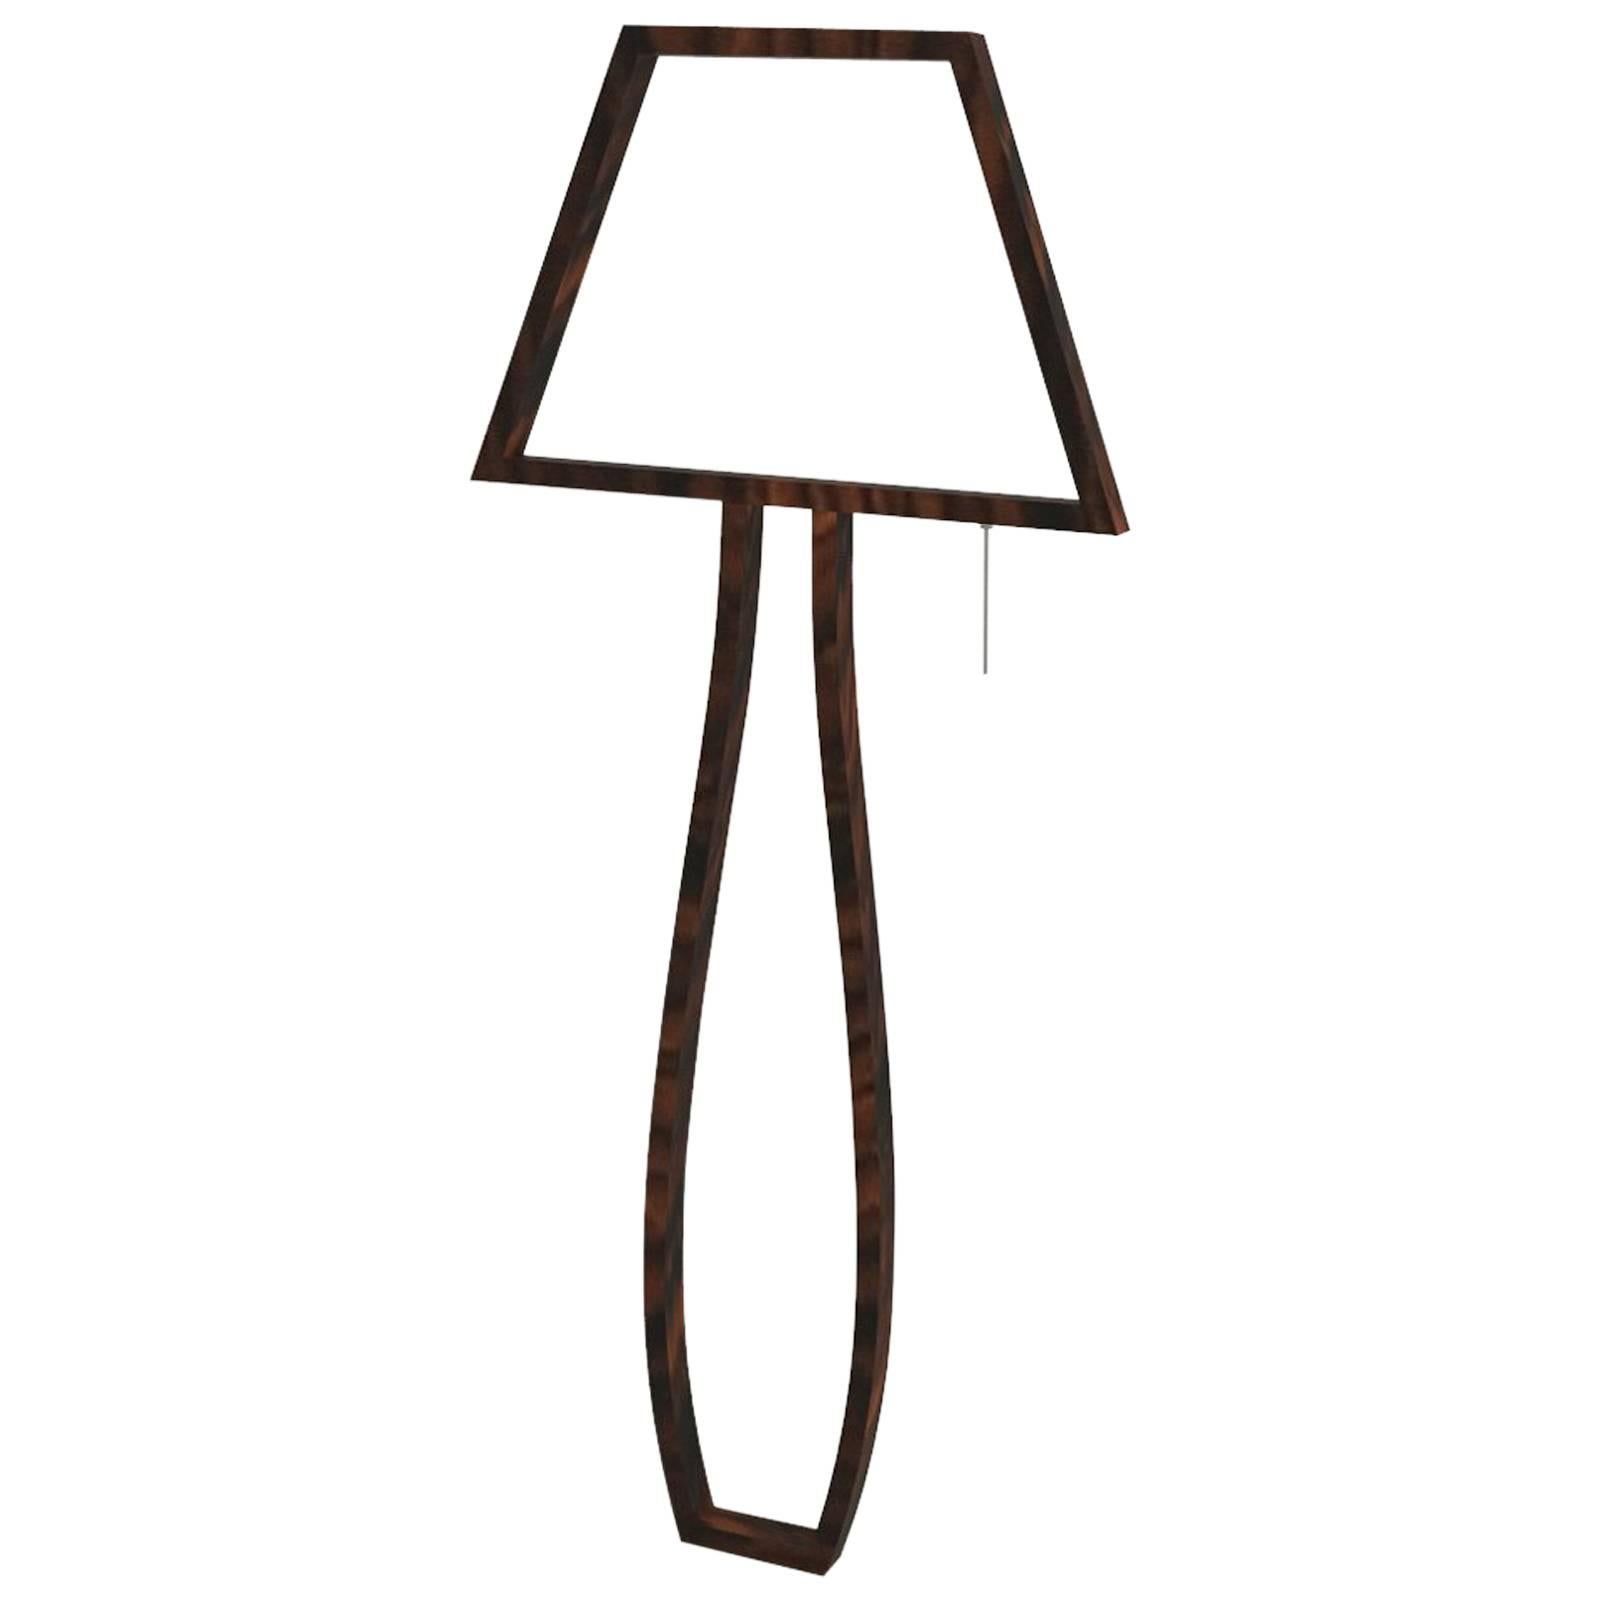 Ghost Brazilian Contemporary Wood Silhouette of a Floor Lamp by Lattoog